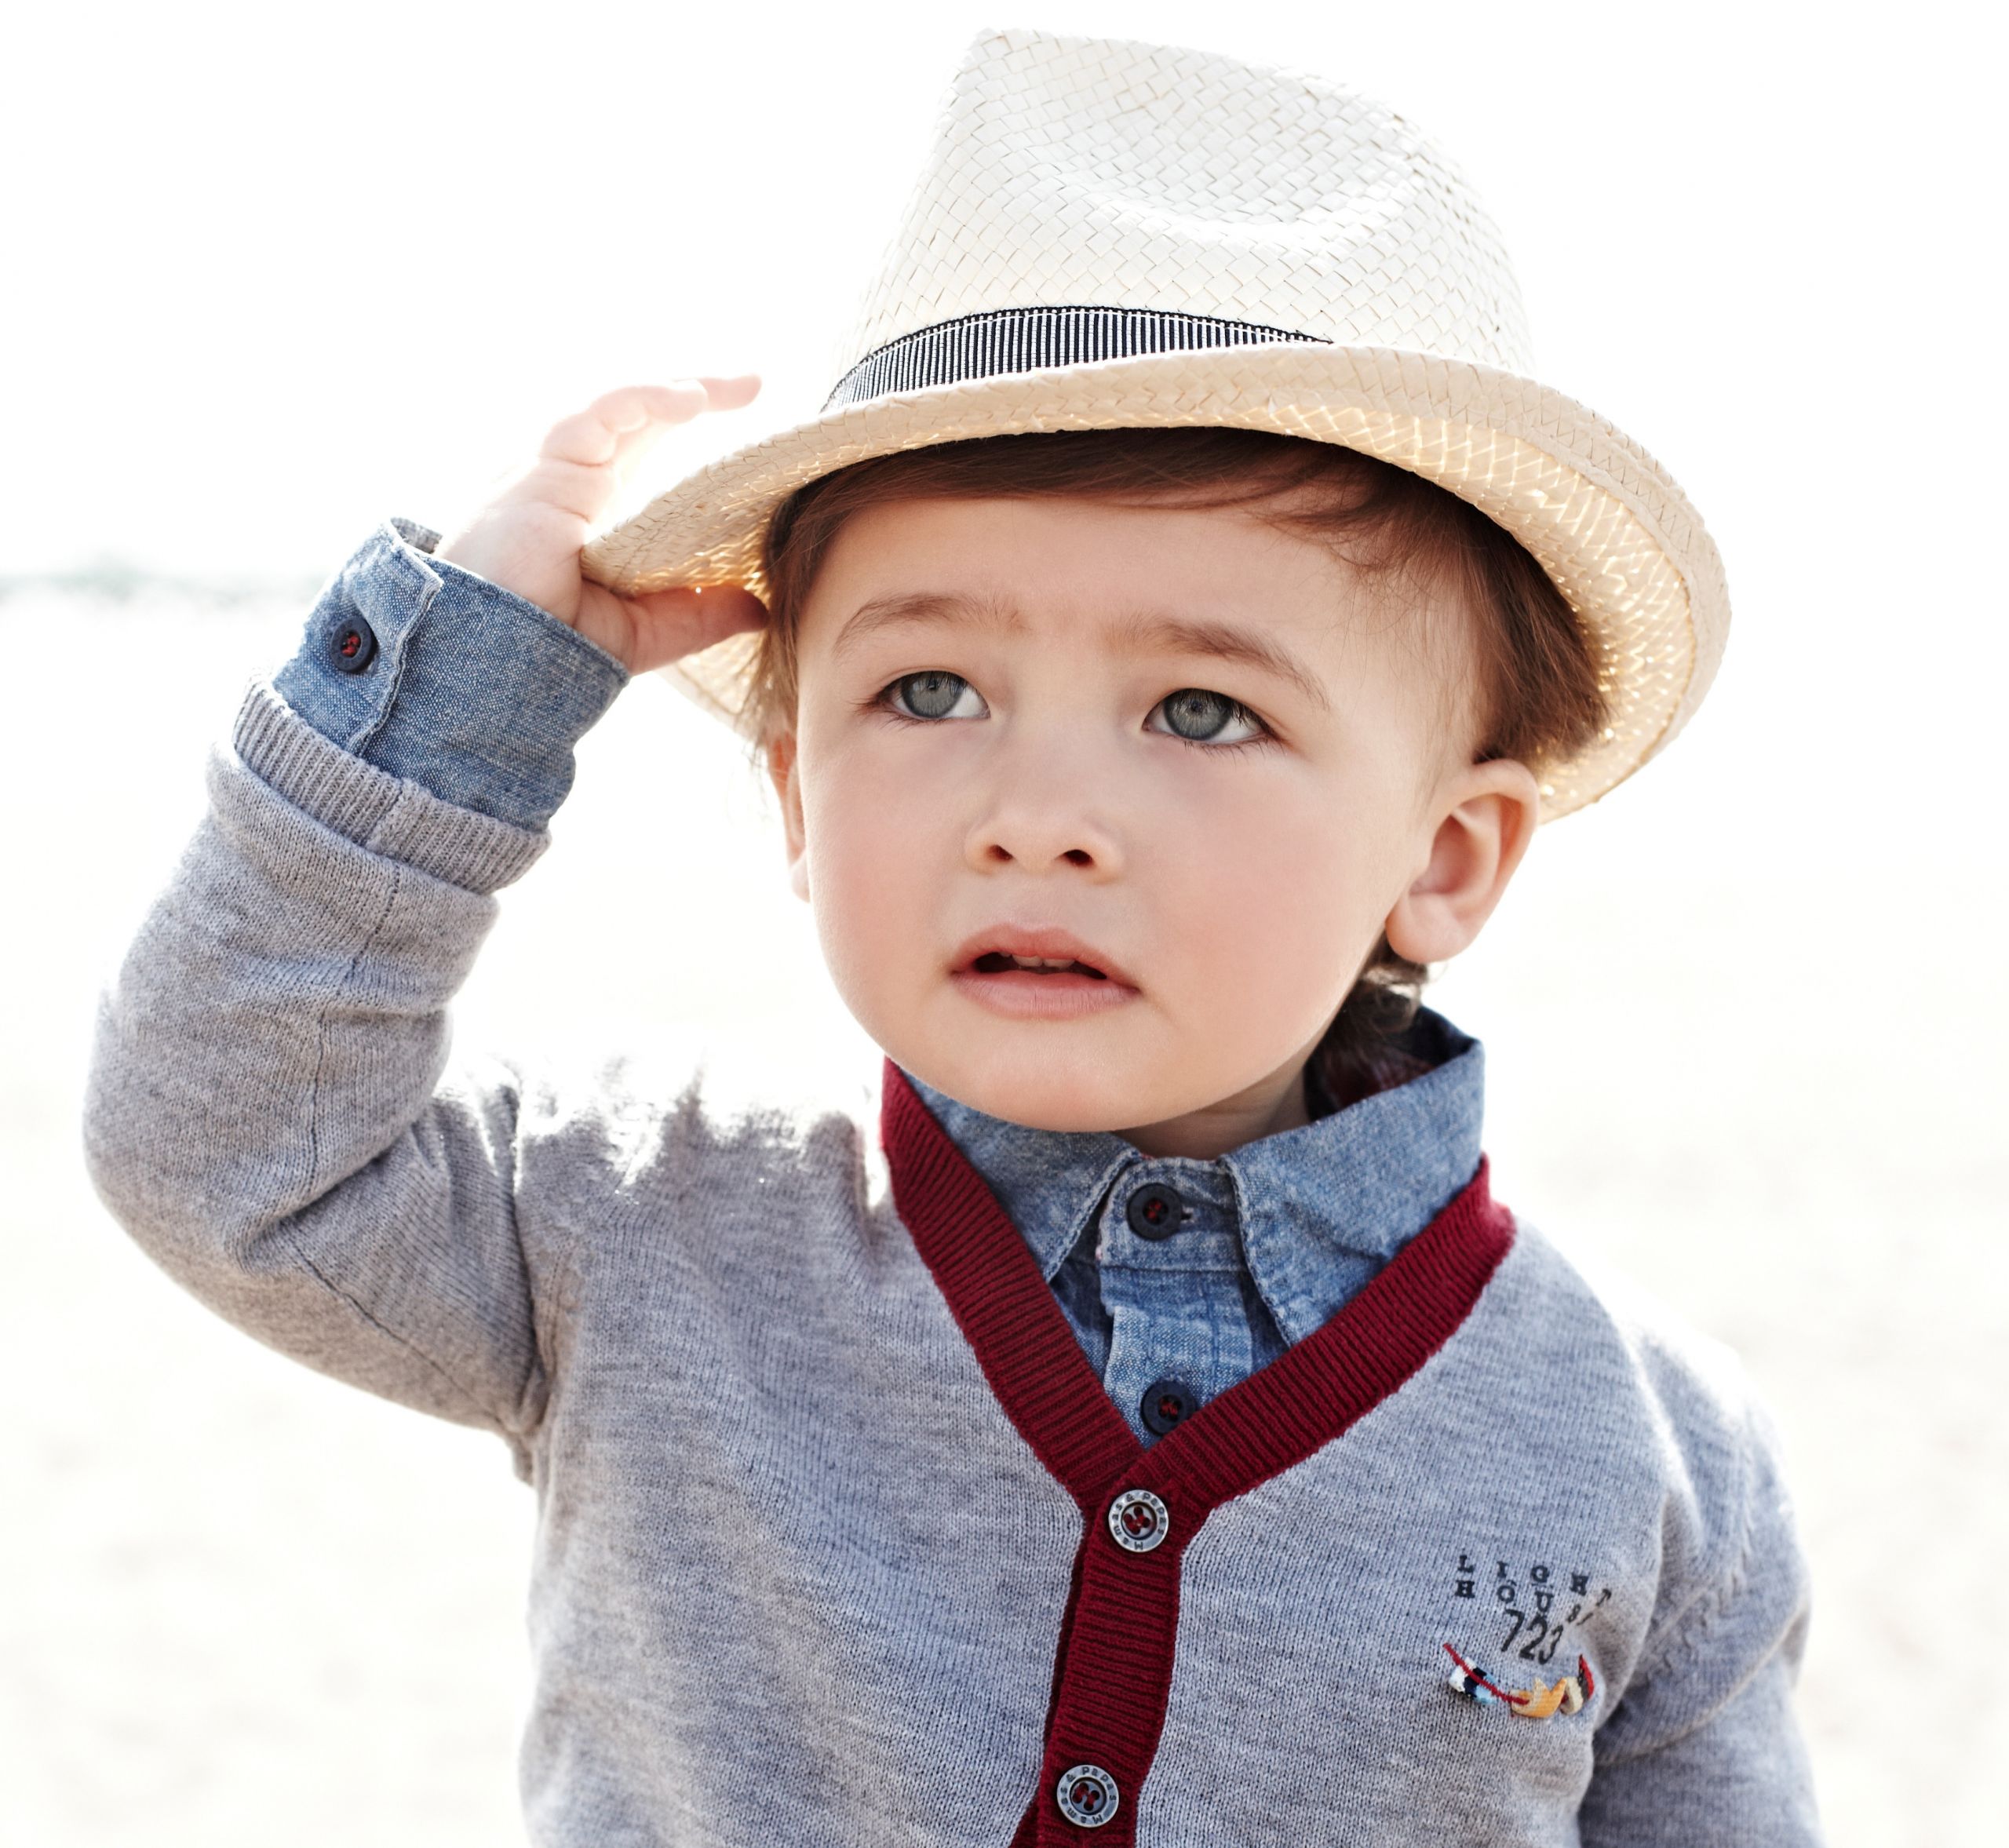 Baby Fashion Clothes
 Importance of Baby Clothing for their Beauty and Care